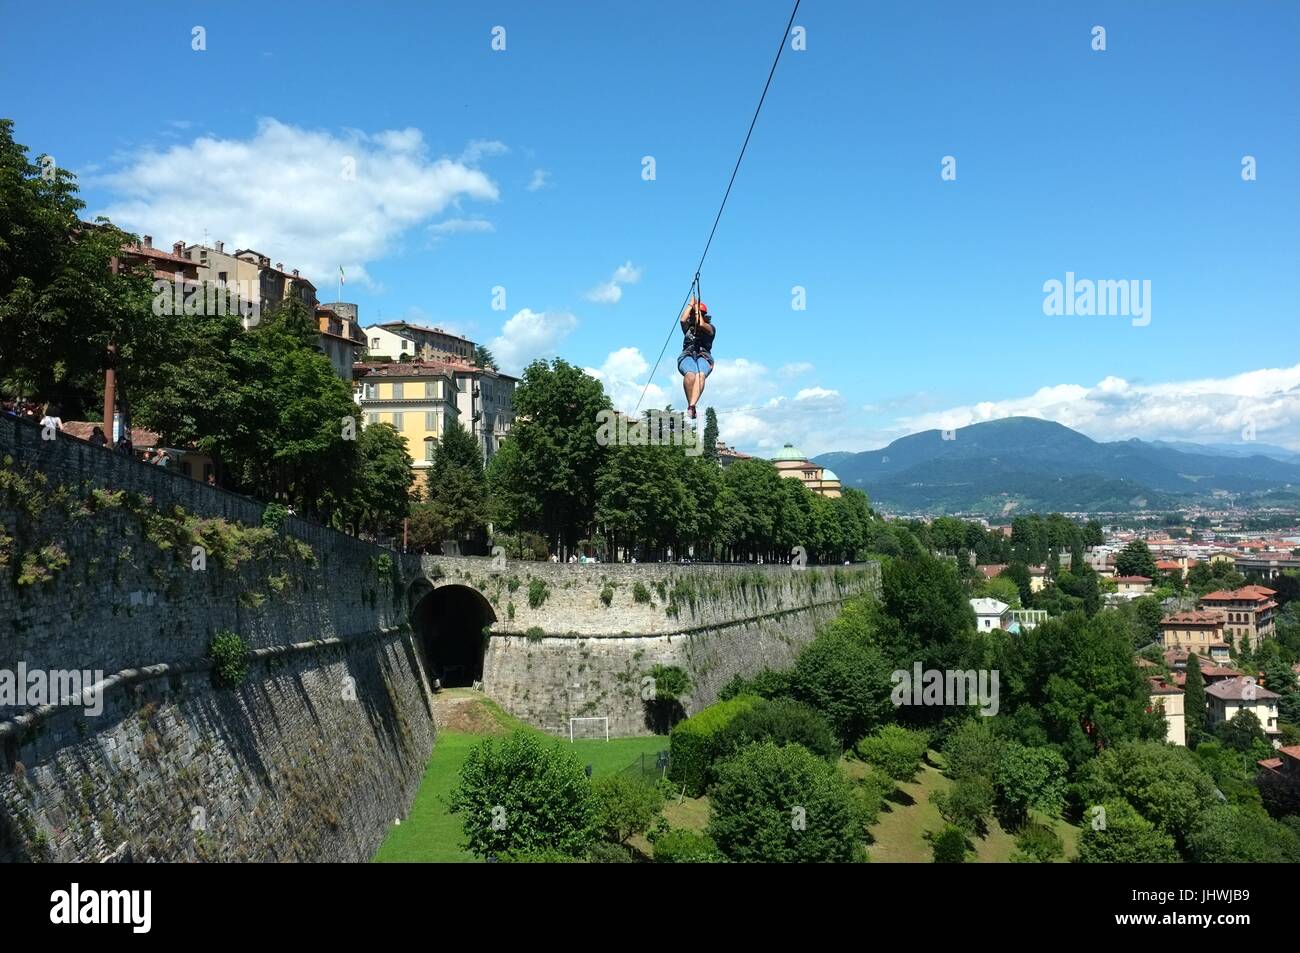 A person zip wiring alongside the historic walls of the Citta Alta (upper city), Bergamo, Lombardy, northern Italy, July 2017 Stock Photo